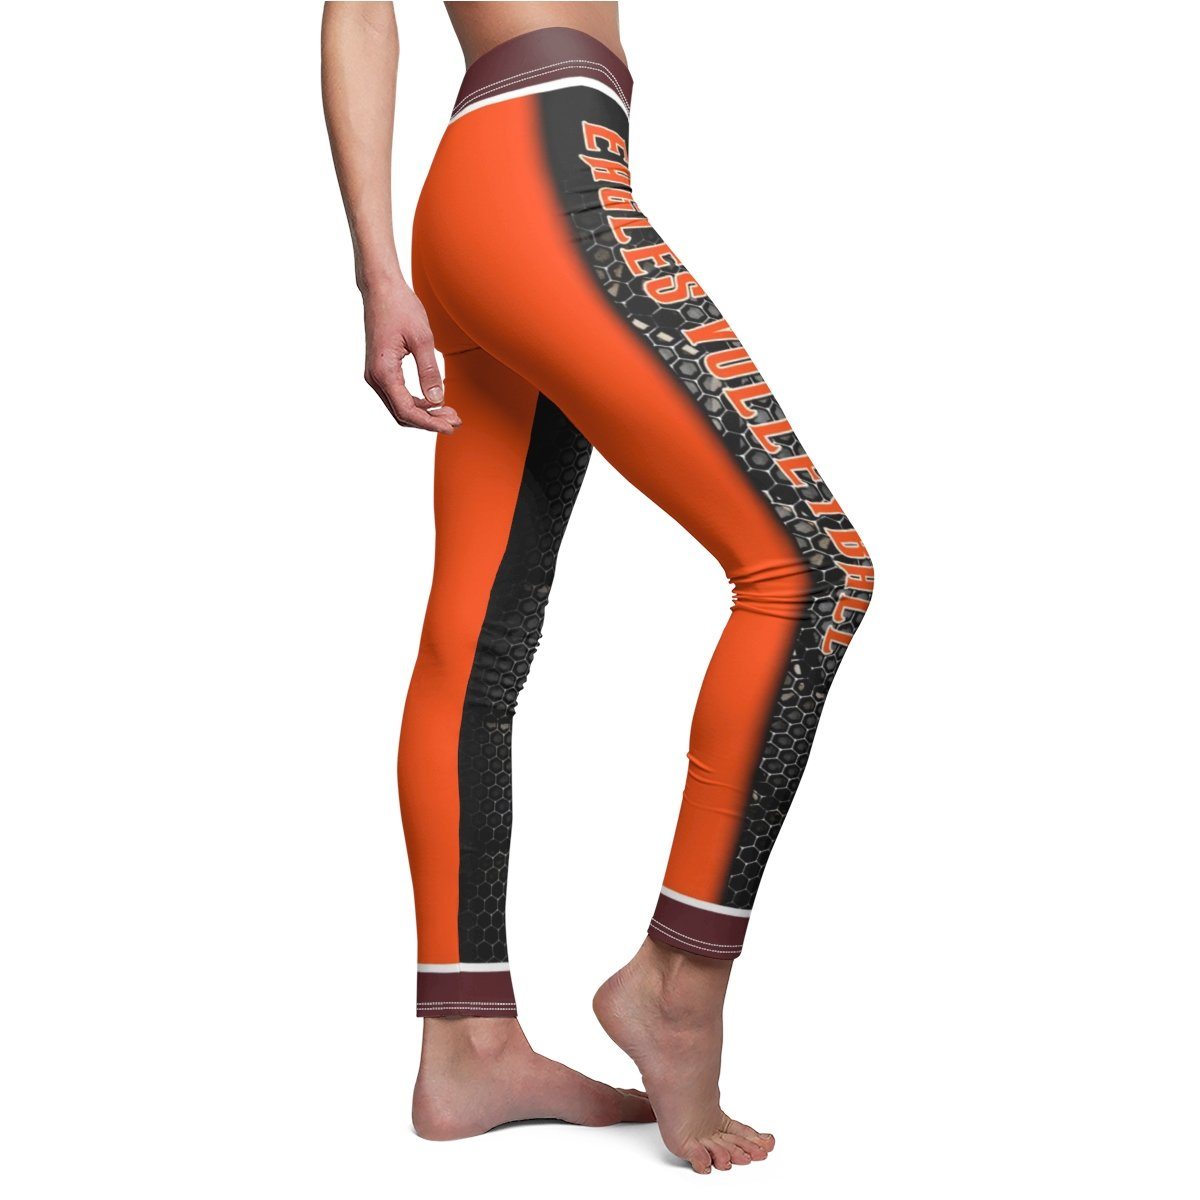 Honeycomb - V.1 - Extreme Sportswear Cut & Sew Leggings Template-Photoshop Template - Photo Solutions